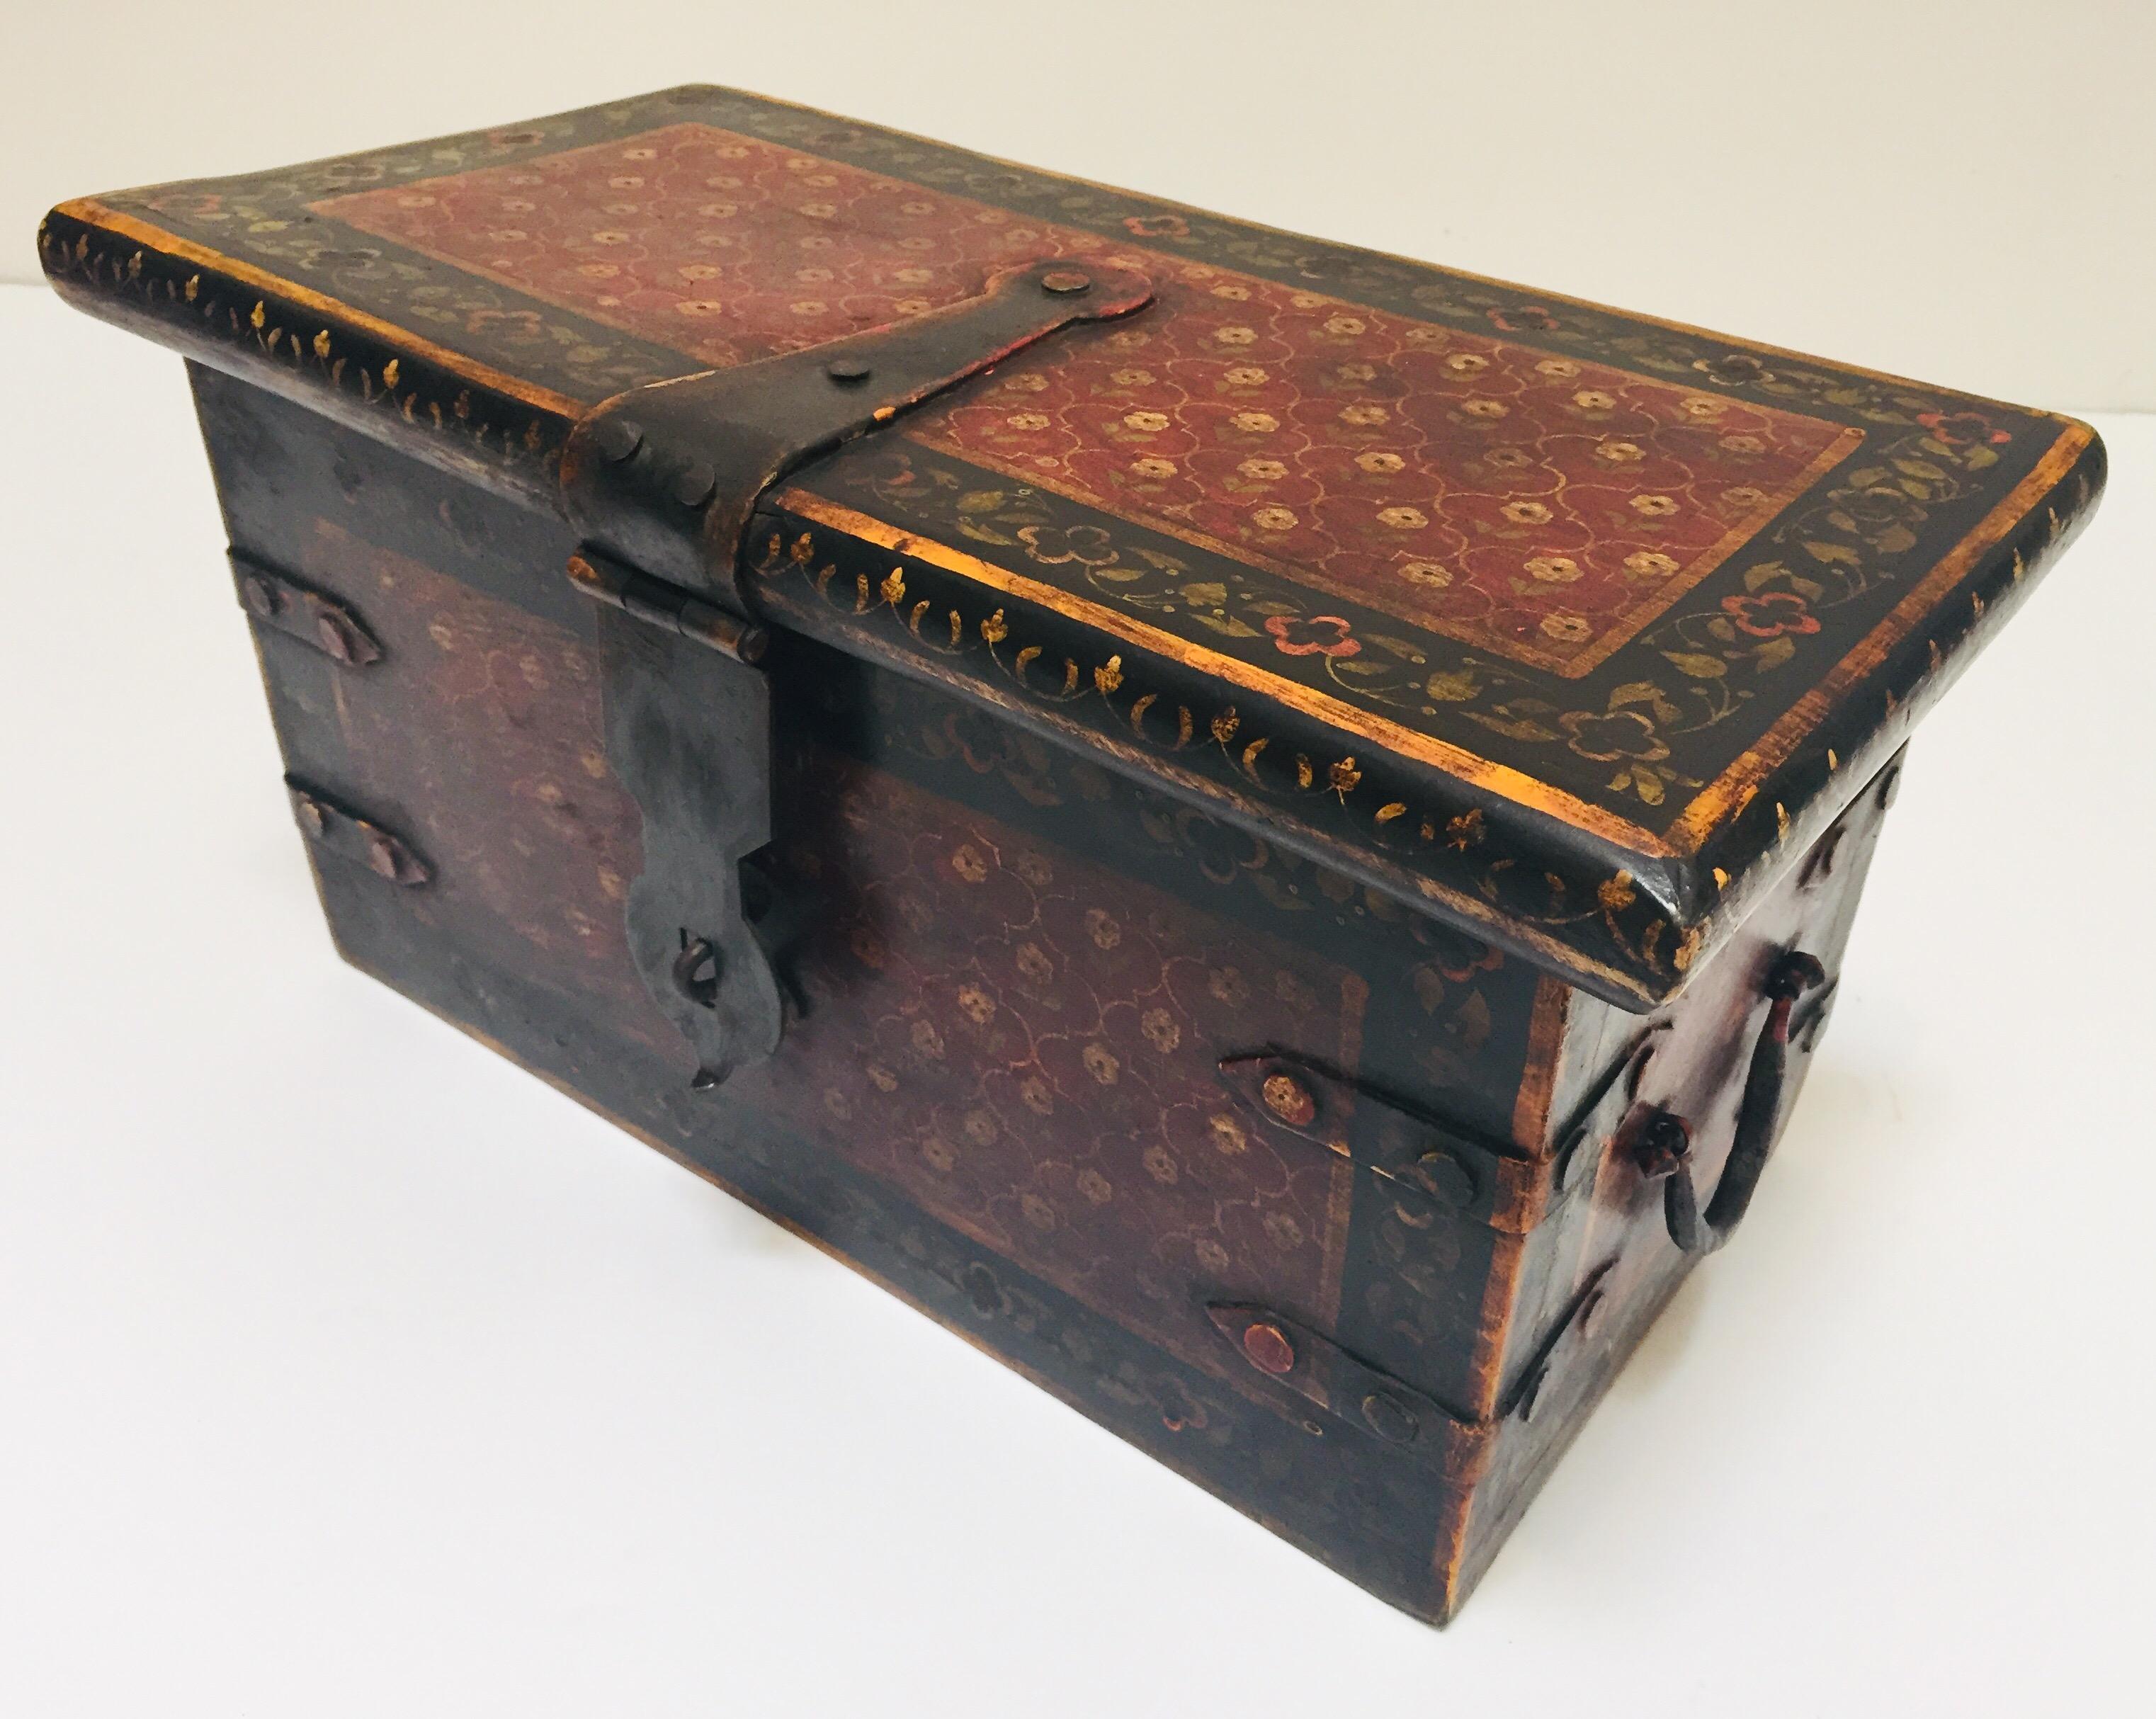 Indian Rajasthani Hand-Painted Large Jewelry Dowry Box